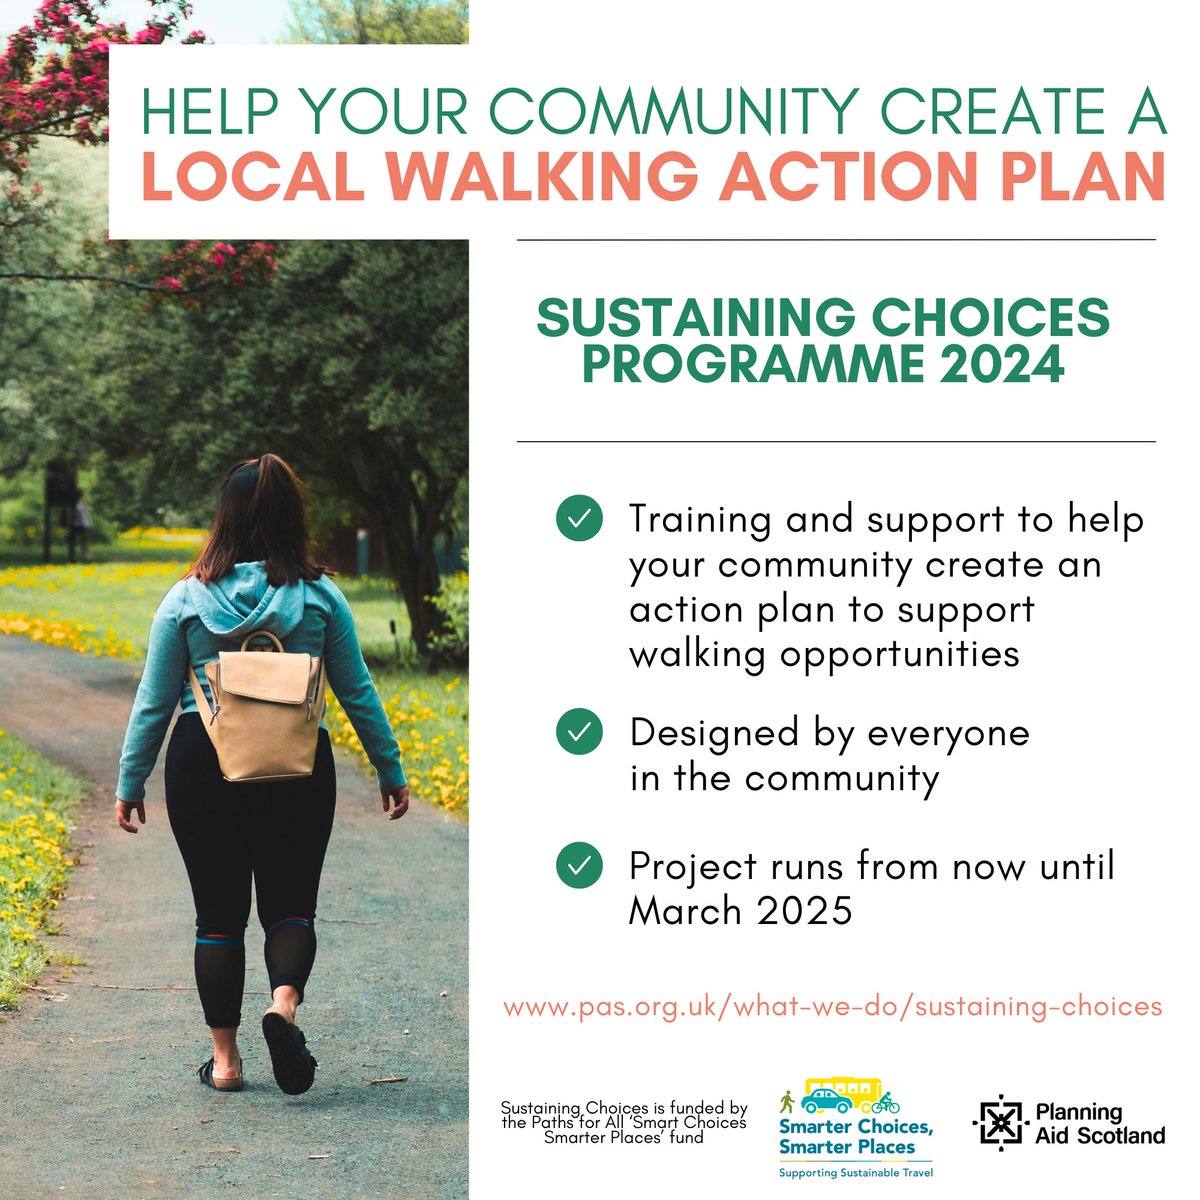 Could your community benefit from a local walking action plan? Our @sustchoices programme is looking for expressions of interest from communities across Scotland to take part, this year with a focus on walking. Find out more: pas.org.uk/what-we-do/sus…